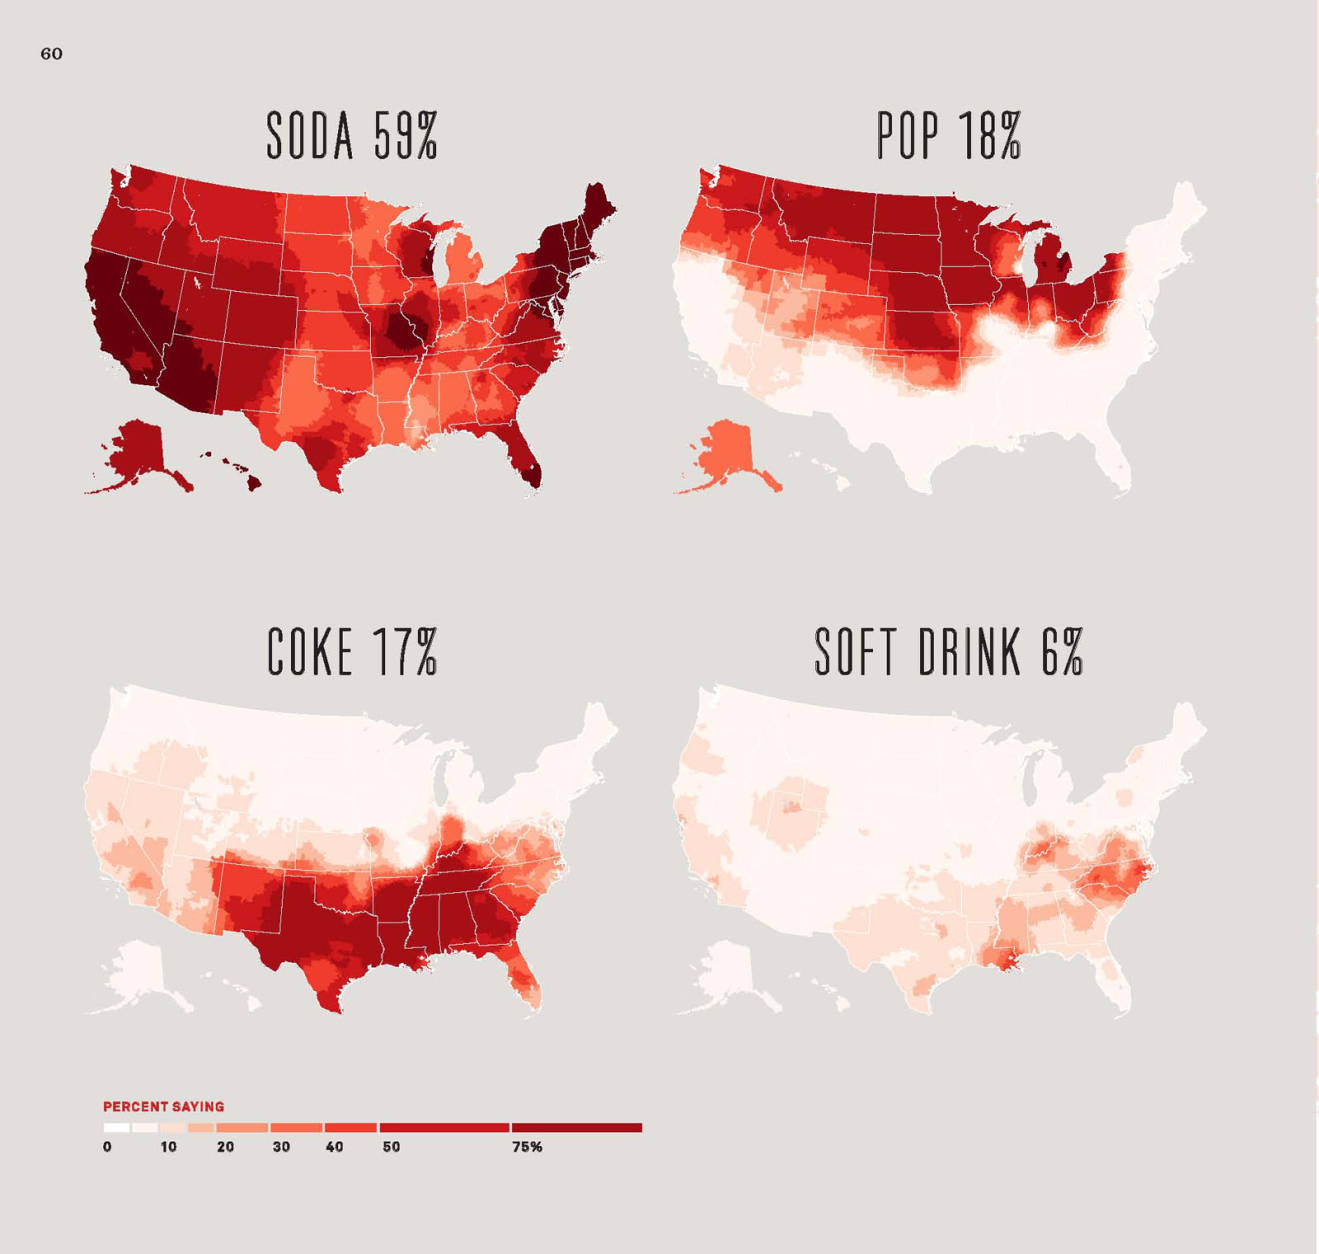 A majority of the country says "soda." But "pop" and "Coke" are strong regional flavors. (Maps excerpted from SPEAKING AMERICAN: How Y’all, Youse , and You Guys Talk: A Visual Guide by Josh Katz. Copyright © 2016 by Josh Katz. Reprinted by permission of Houghton Mifflin Harcourt Publishing Company. All rights reserved.)